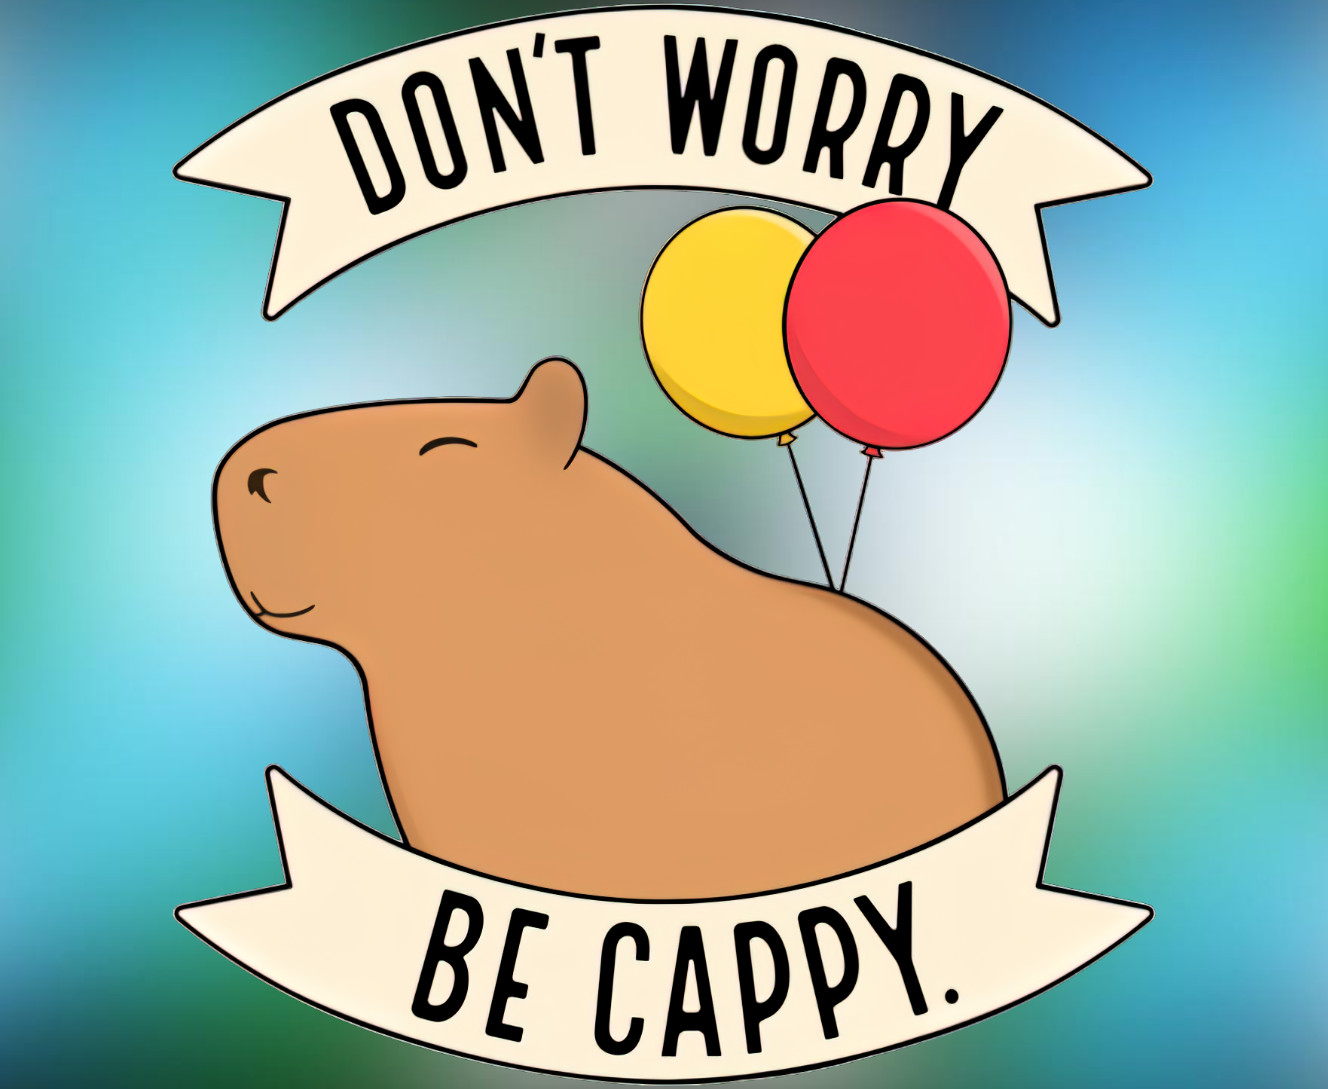 Don't worry be cappy